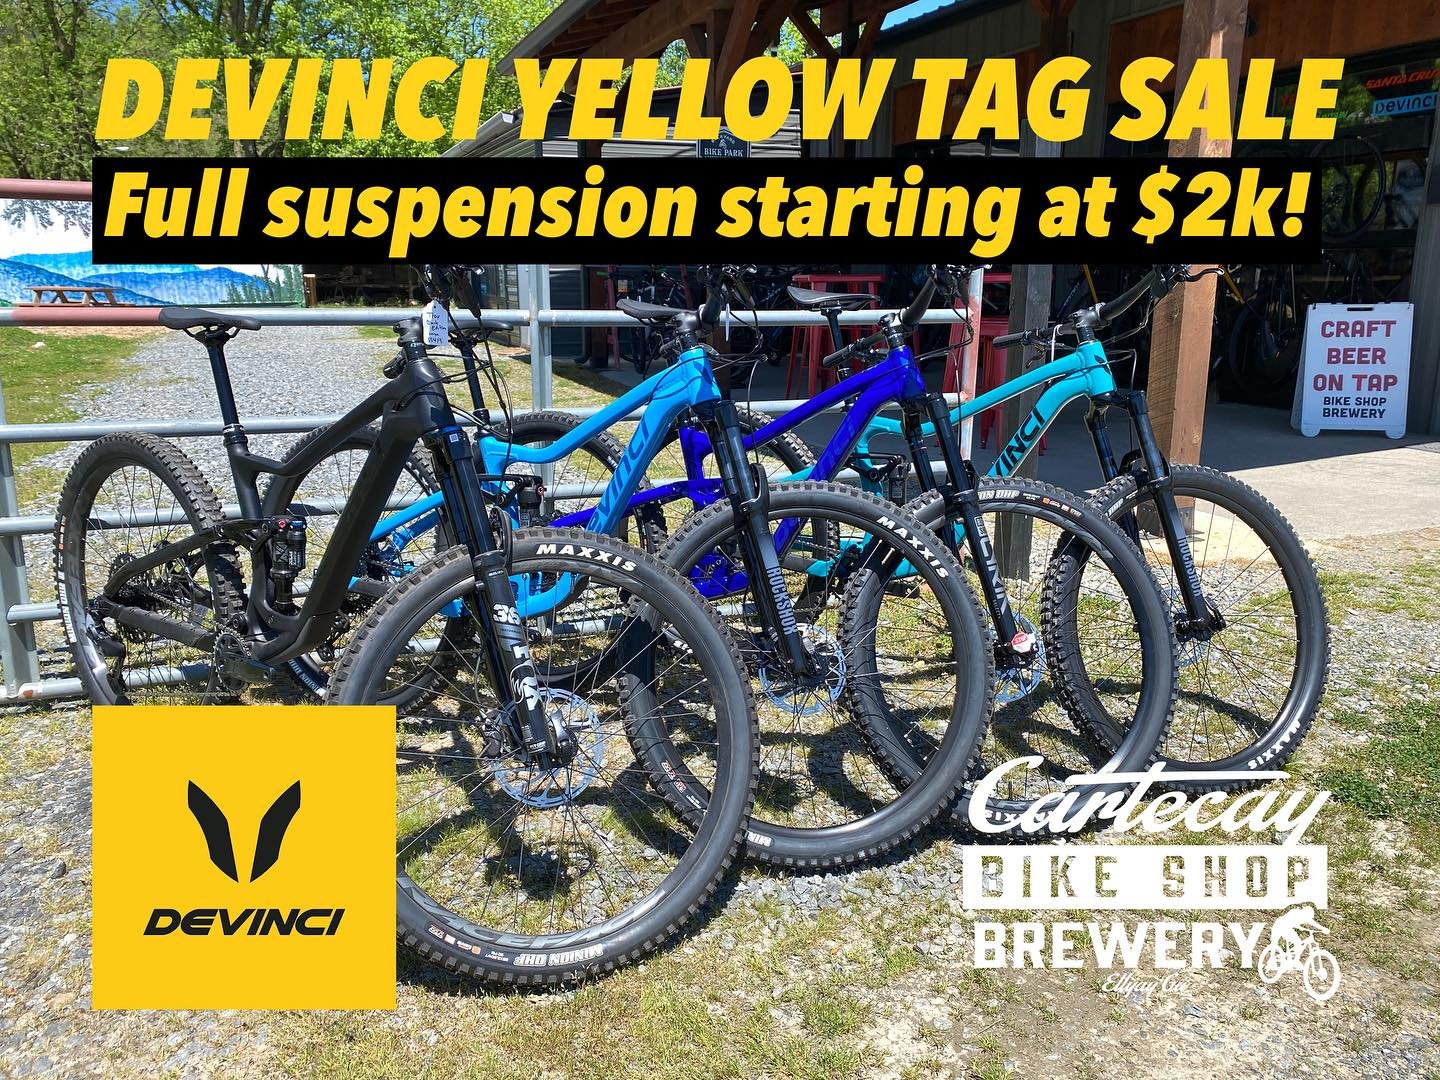 Have you seen the new Devinci Yellow Tag Sale? Bikes are listed at 15-25% off. Not familiar with Devinci? They have been bringing bikes and riders together since 1987 and feature lifetime warranty frames. Stop by and check them out. @cyclesdevinci